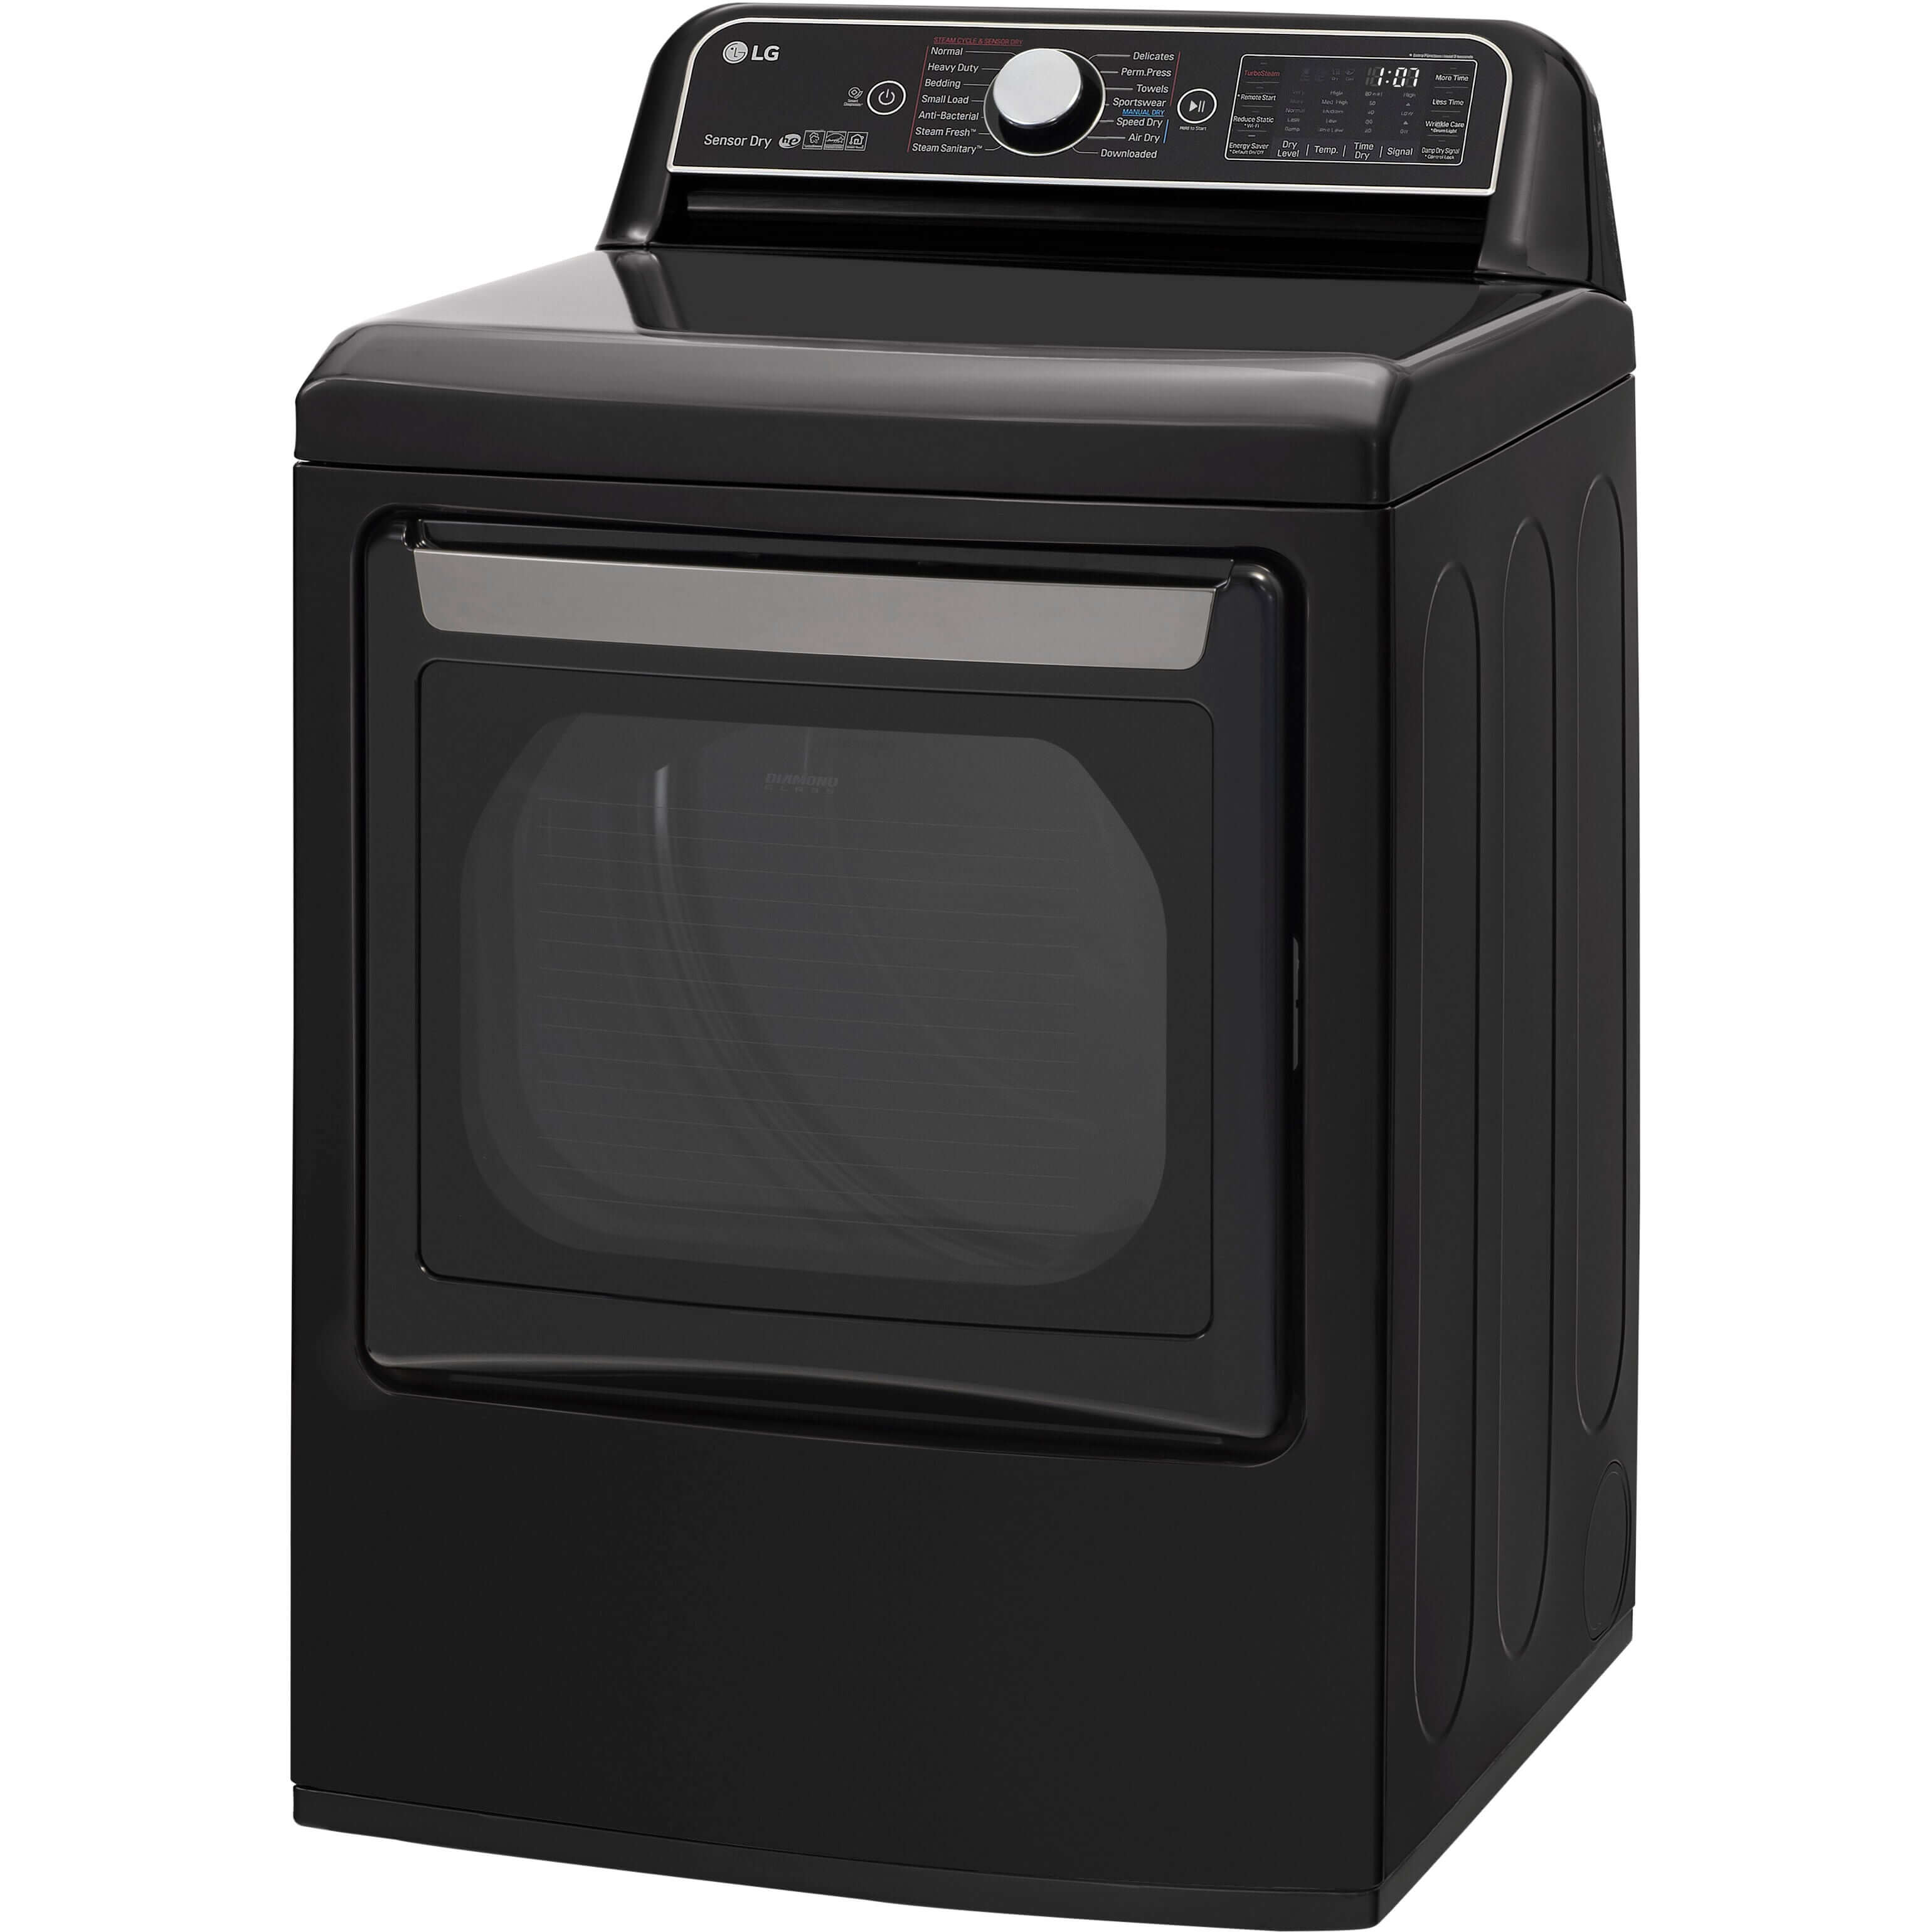 LG 27 Inch Smart wi-fi Enabled Gas Dryer with TurboSteam In Black Steel 7.3 cu. ft. (DLGX7901BE)